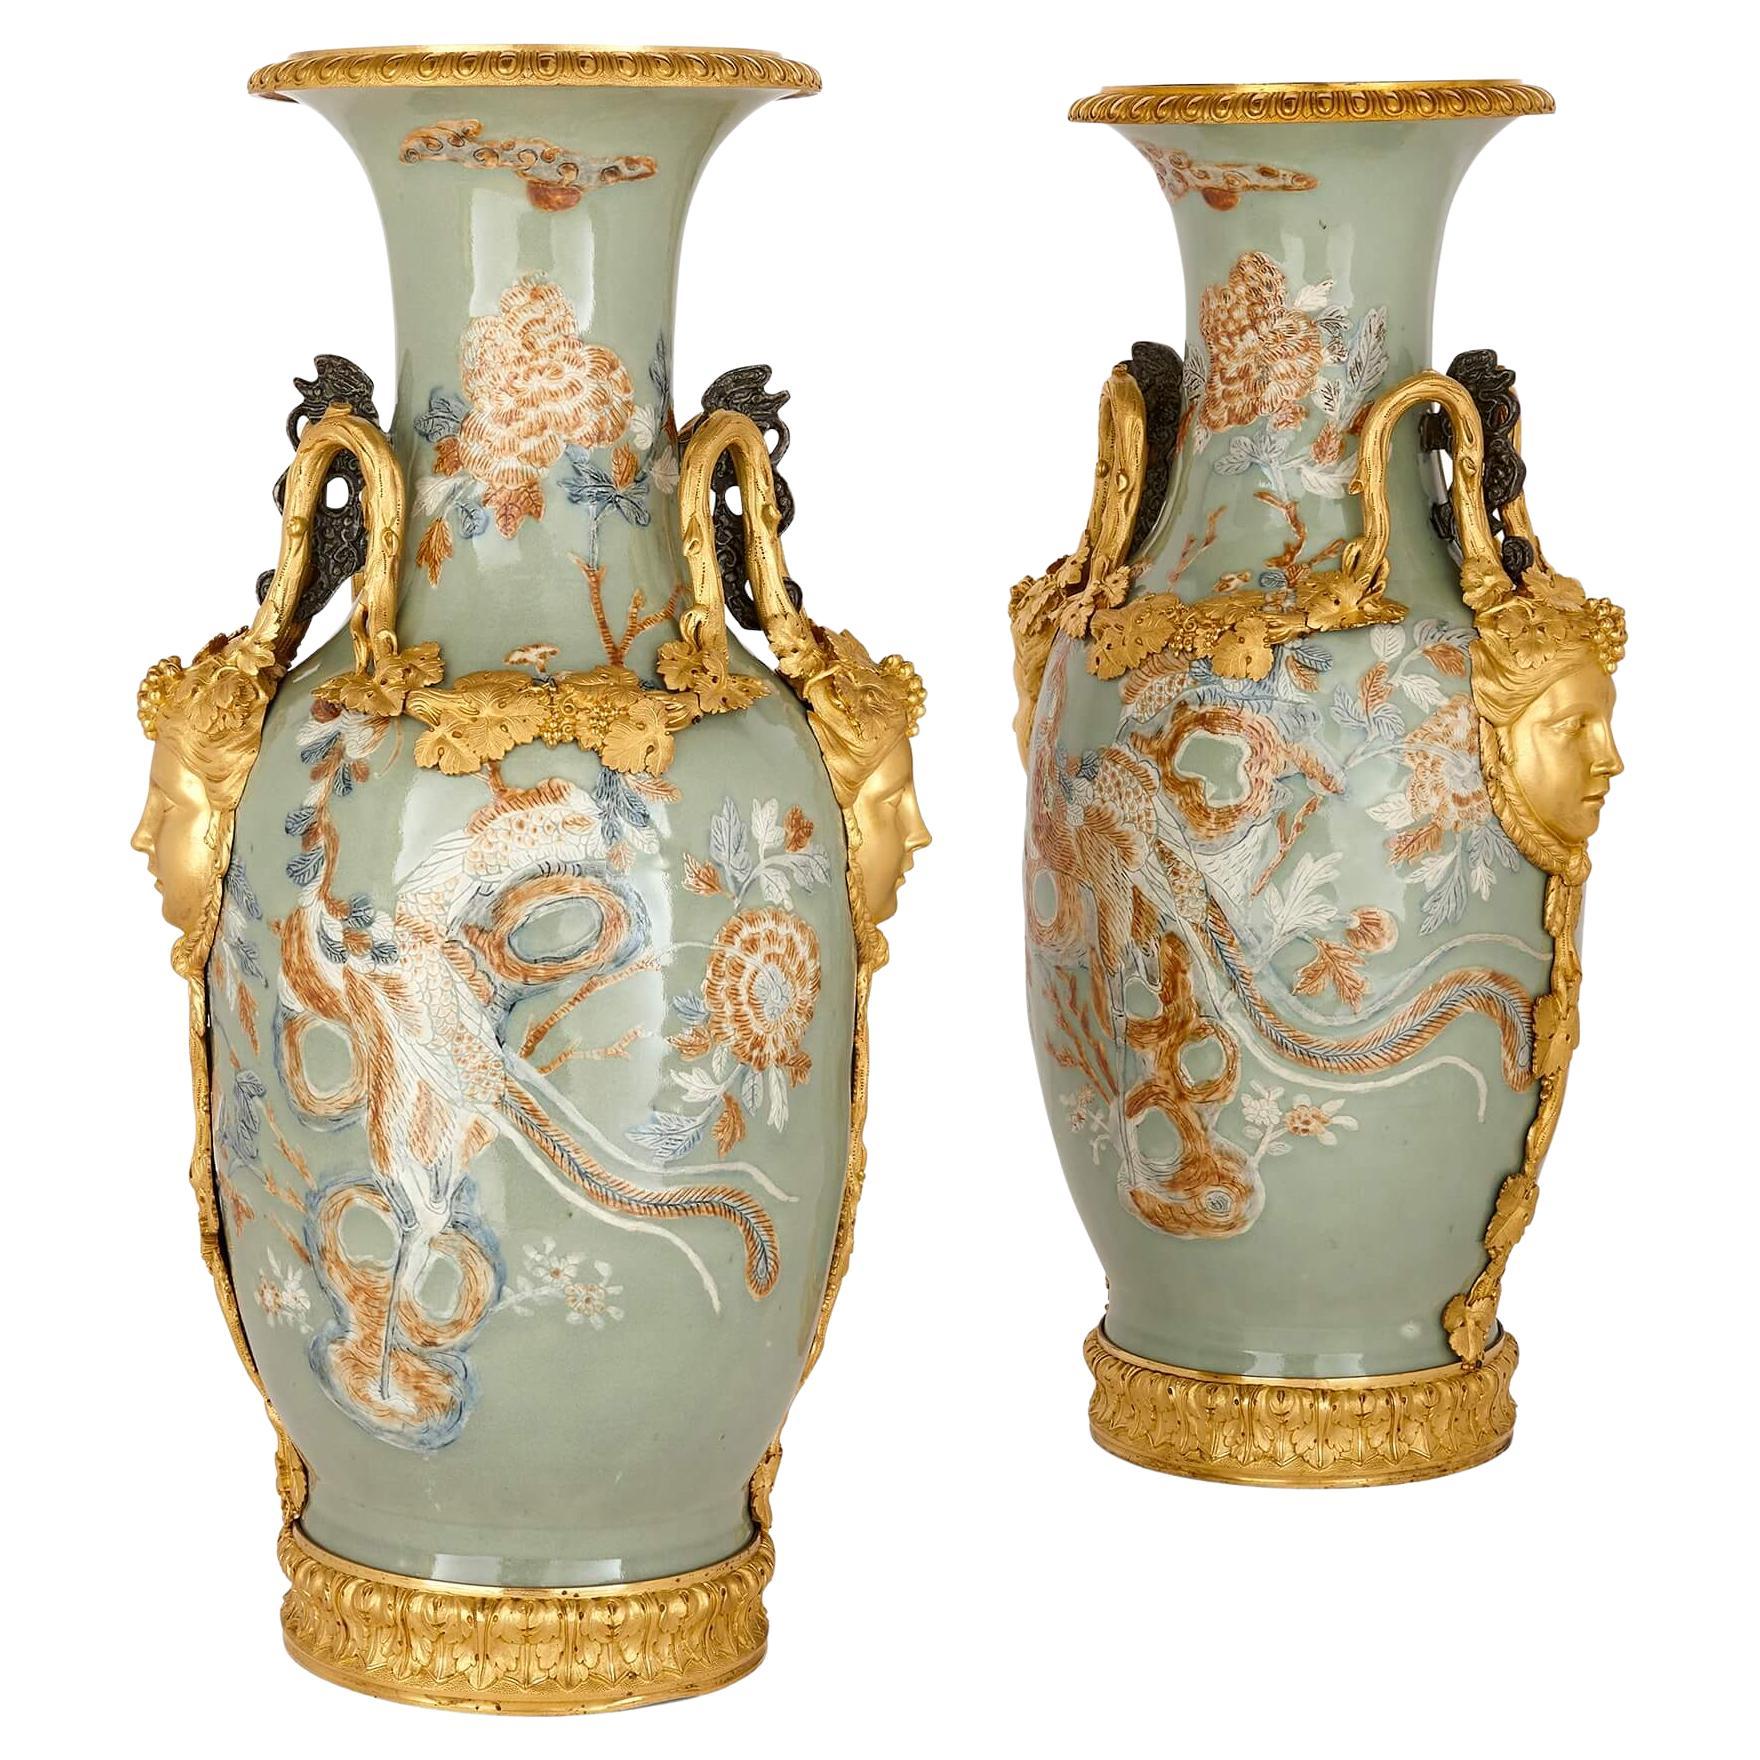 Pair of Large Chinese Porcelain Vases with French Ormolu Mounts